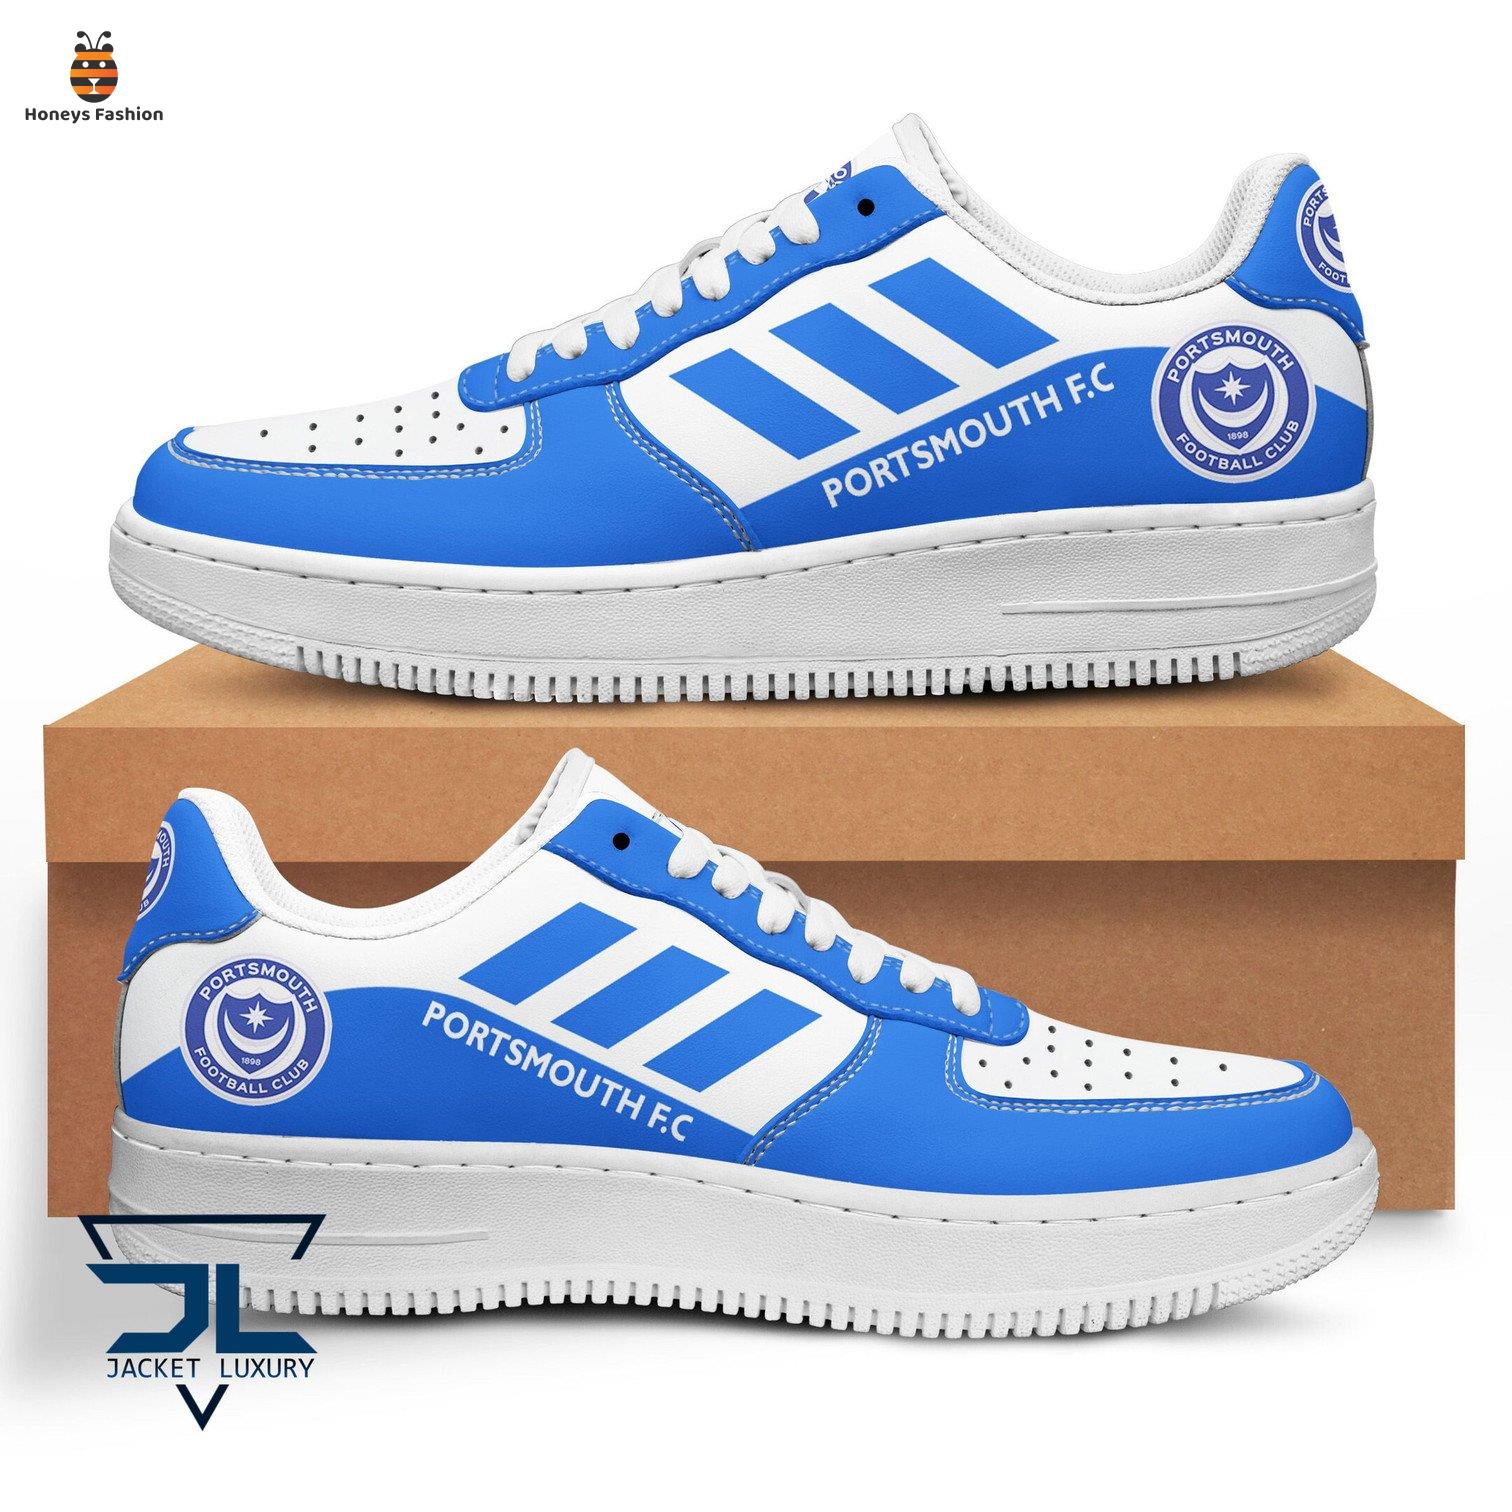 Portsmouth F.C air force 1 shoes